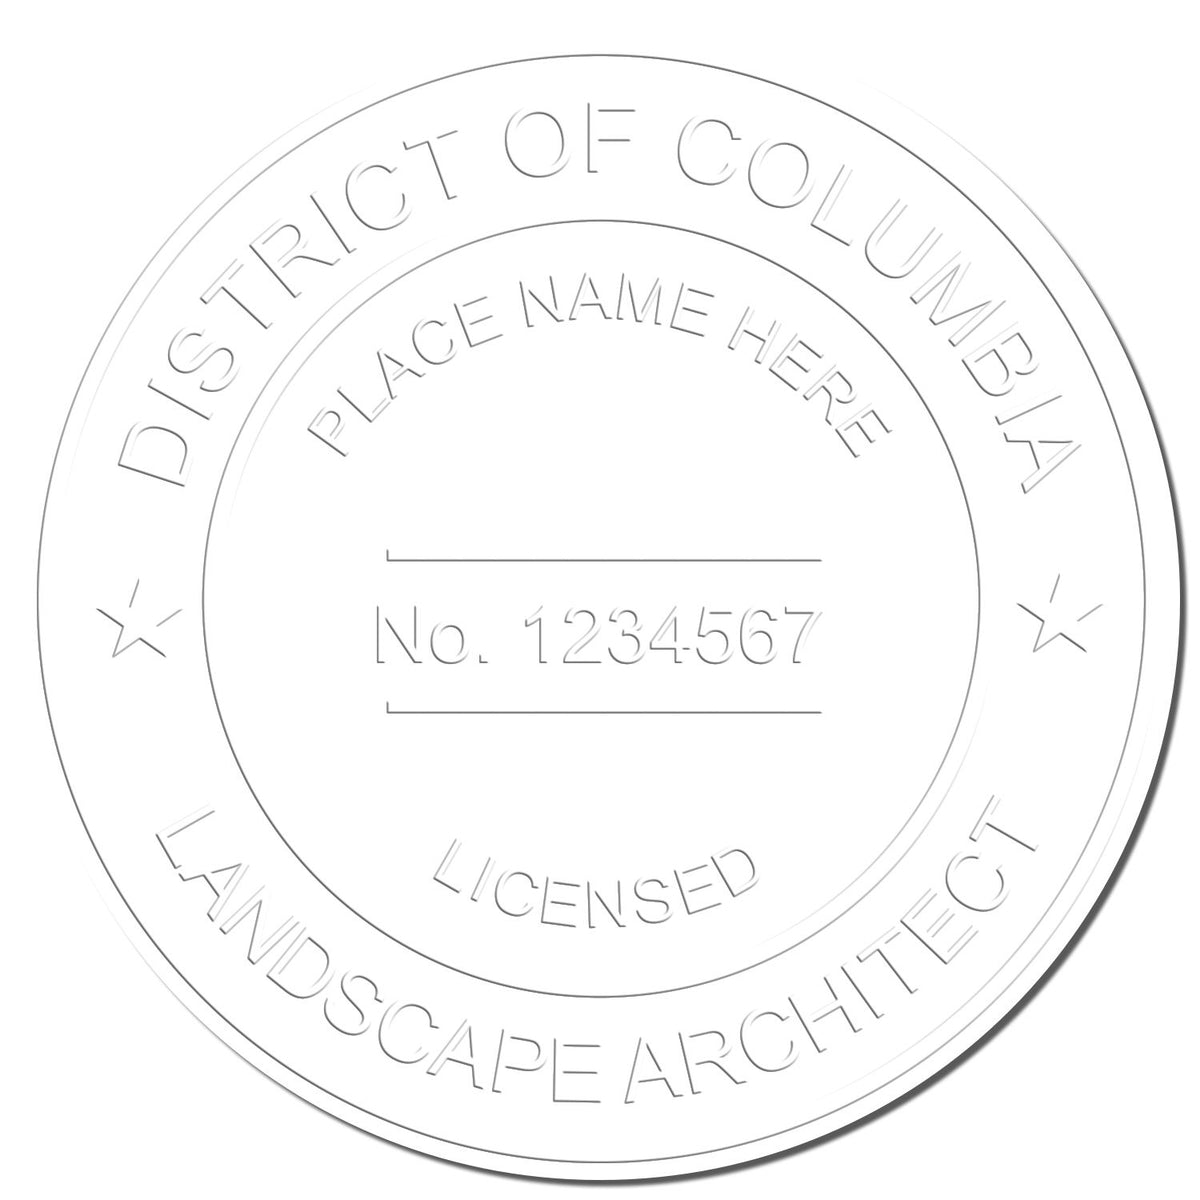 This paper is stamped with a sample imprint of the Gift District of Columbia Landscape Architect Seal, signifying its quality and reliability.